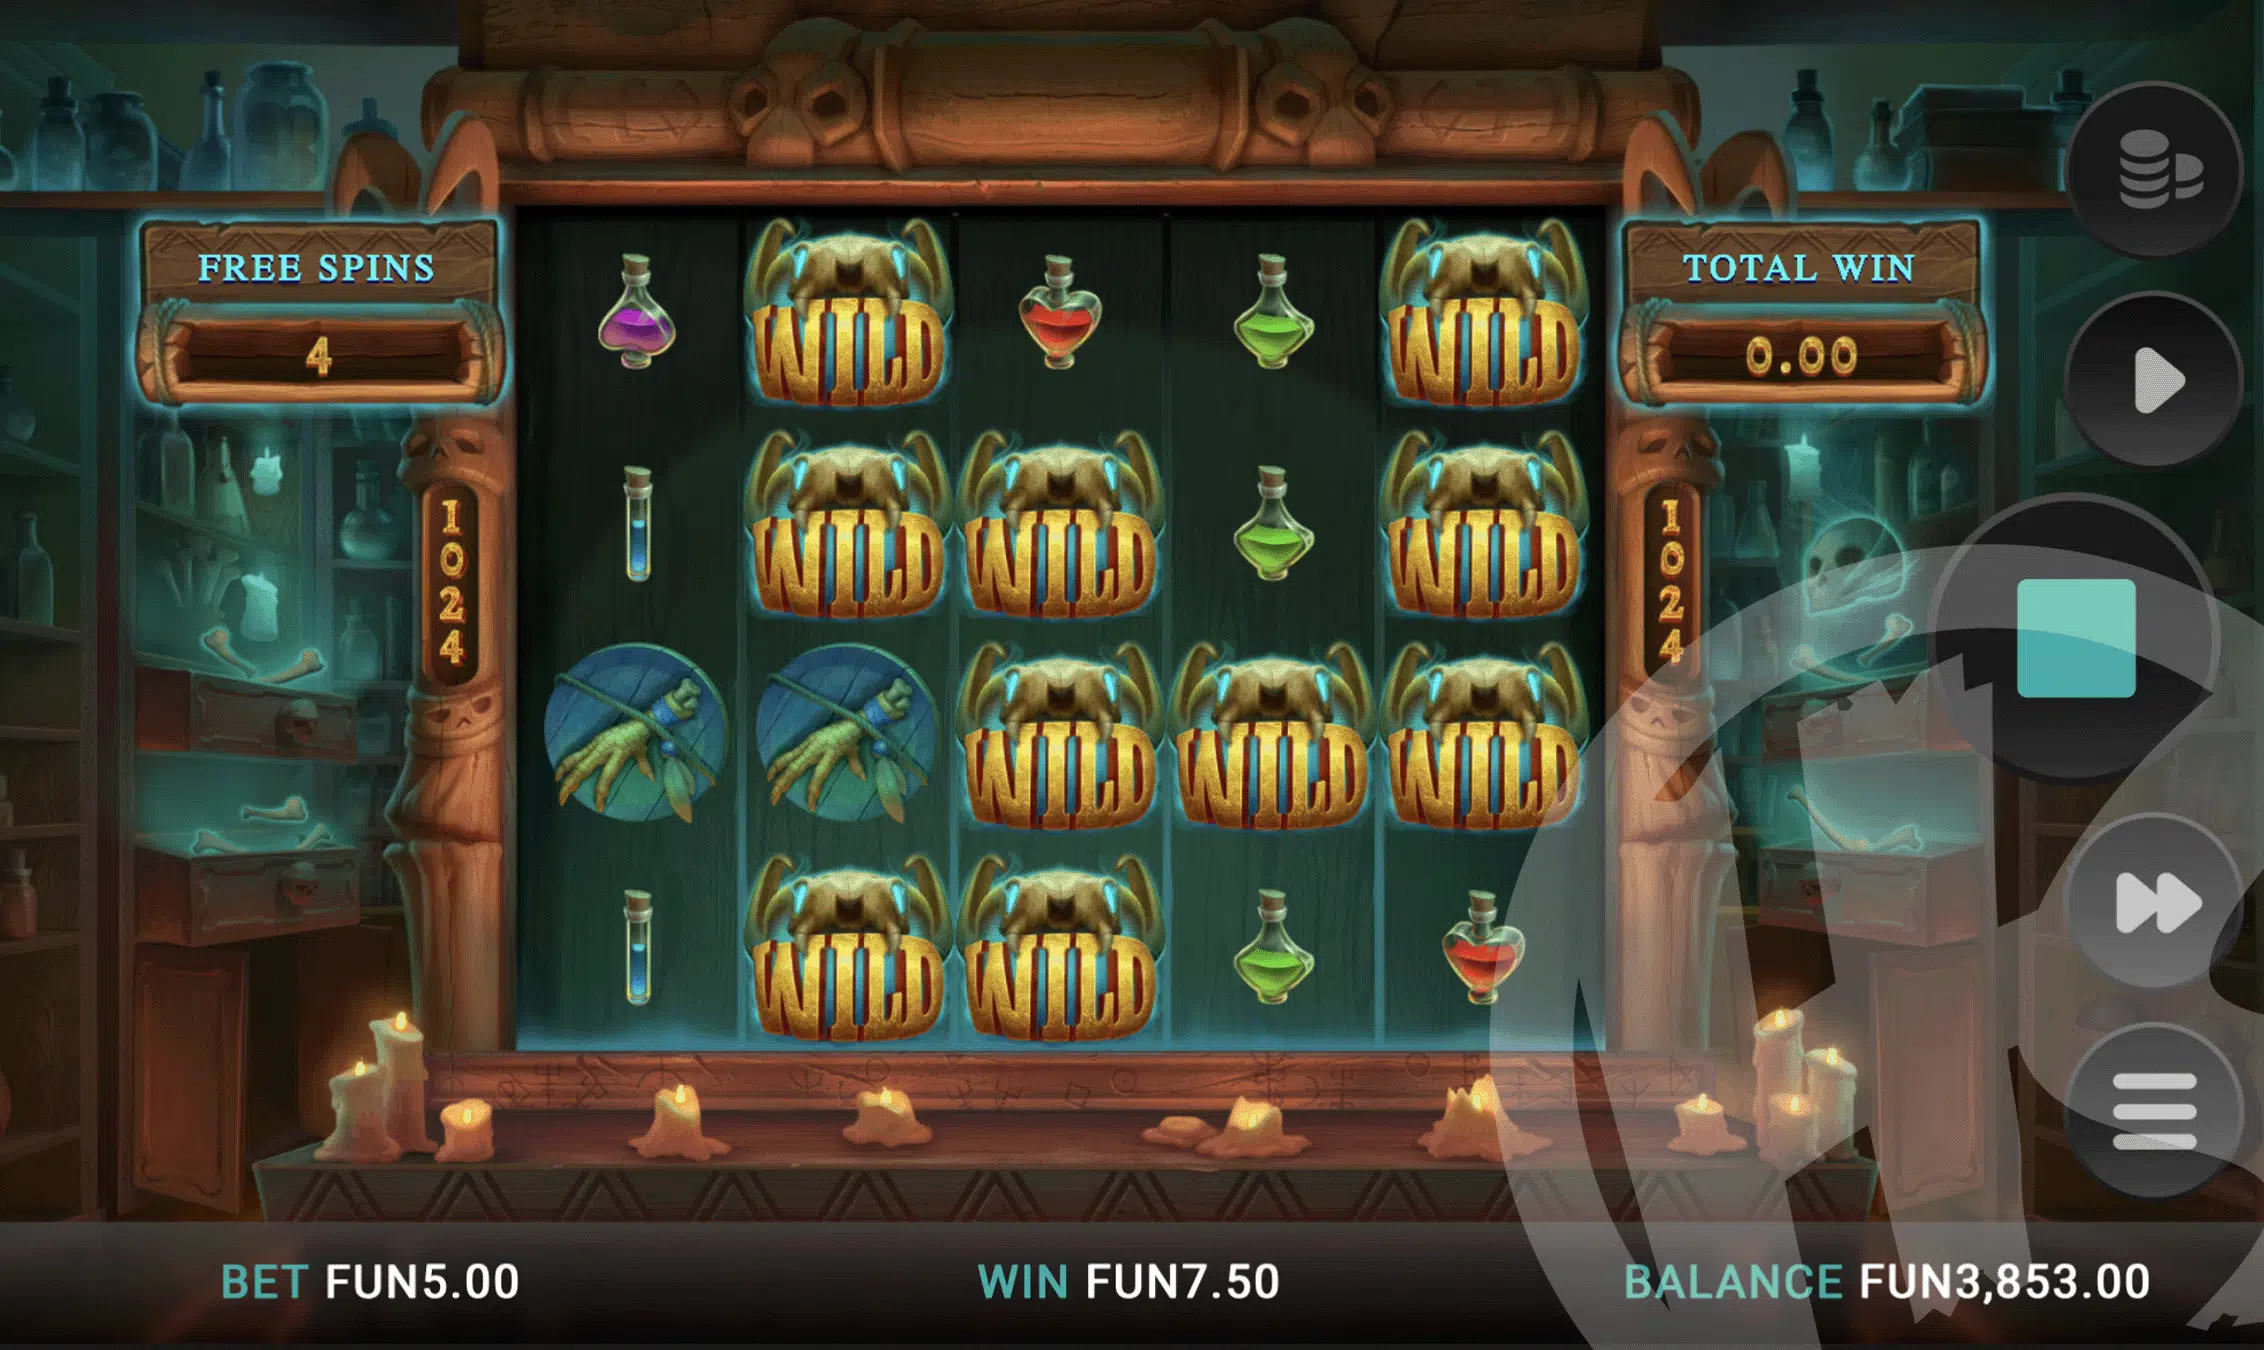 Positions are Marked For the Duration of Free Spins